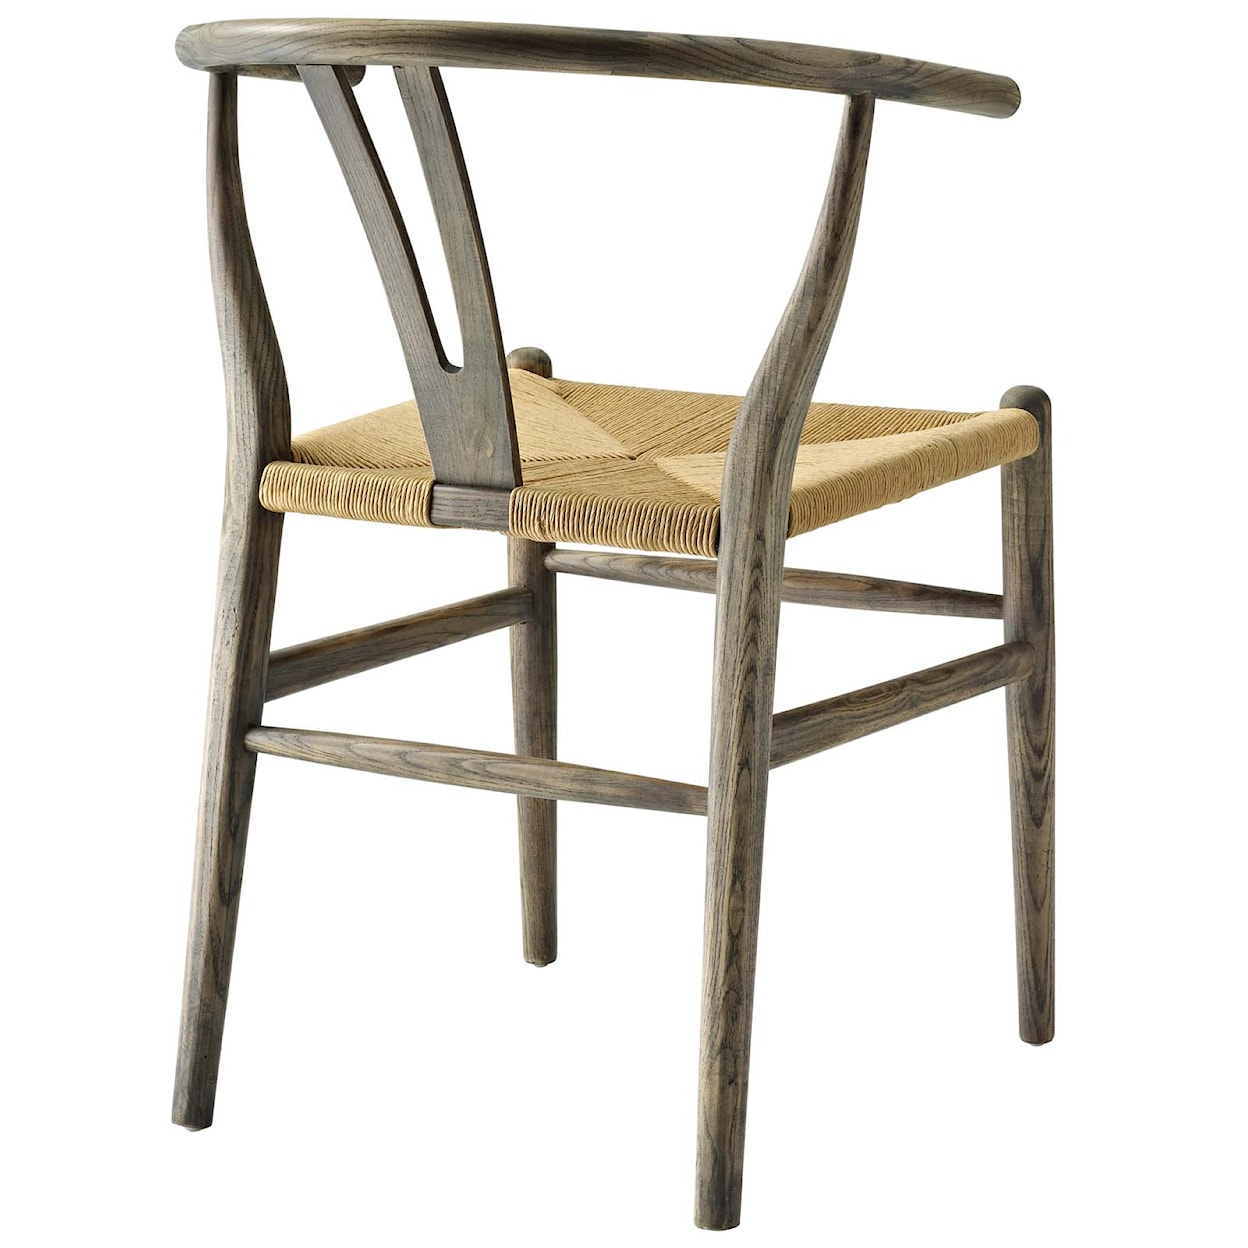 Modway Amish Dining Side Chair